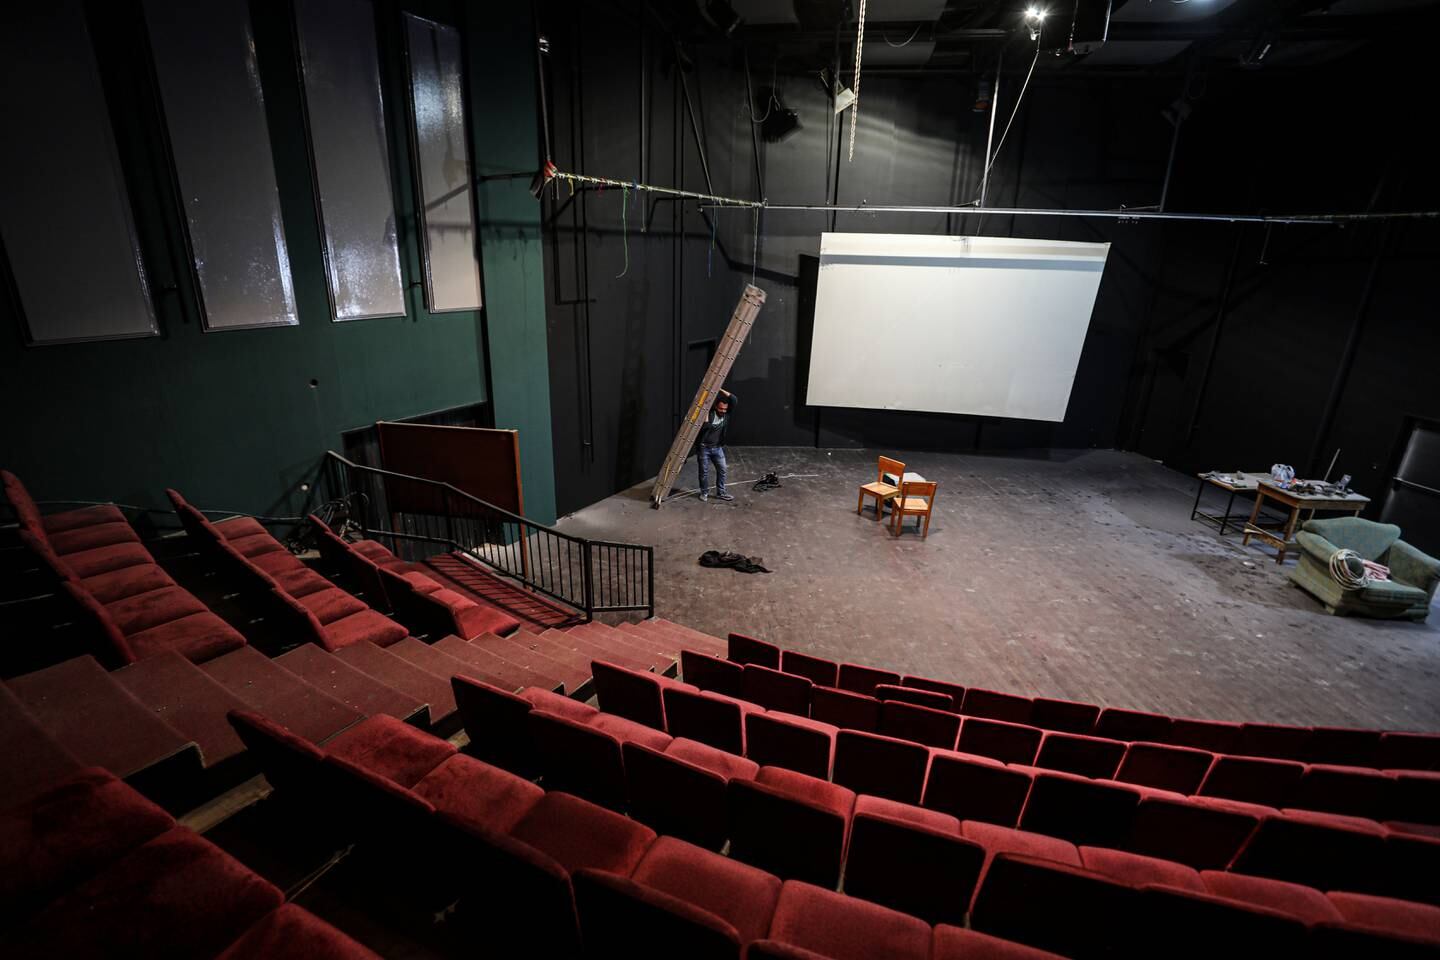 The theatre at the Holst Park and Cultural Centre, near Gaza’s historic quarter, which is undergoing renovation before being reopened as a cinema. Majd Mohamad for The National